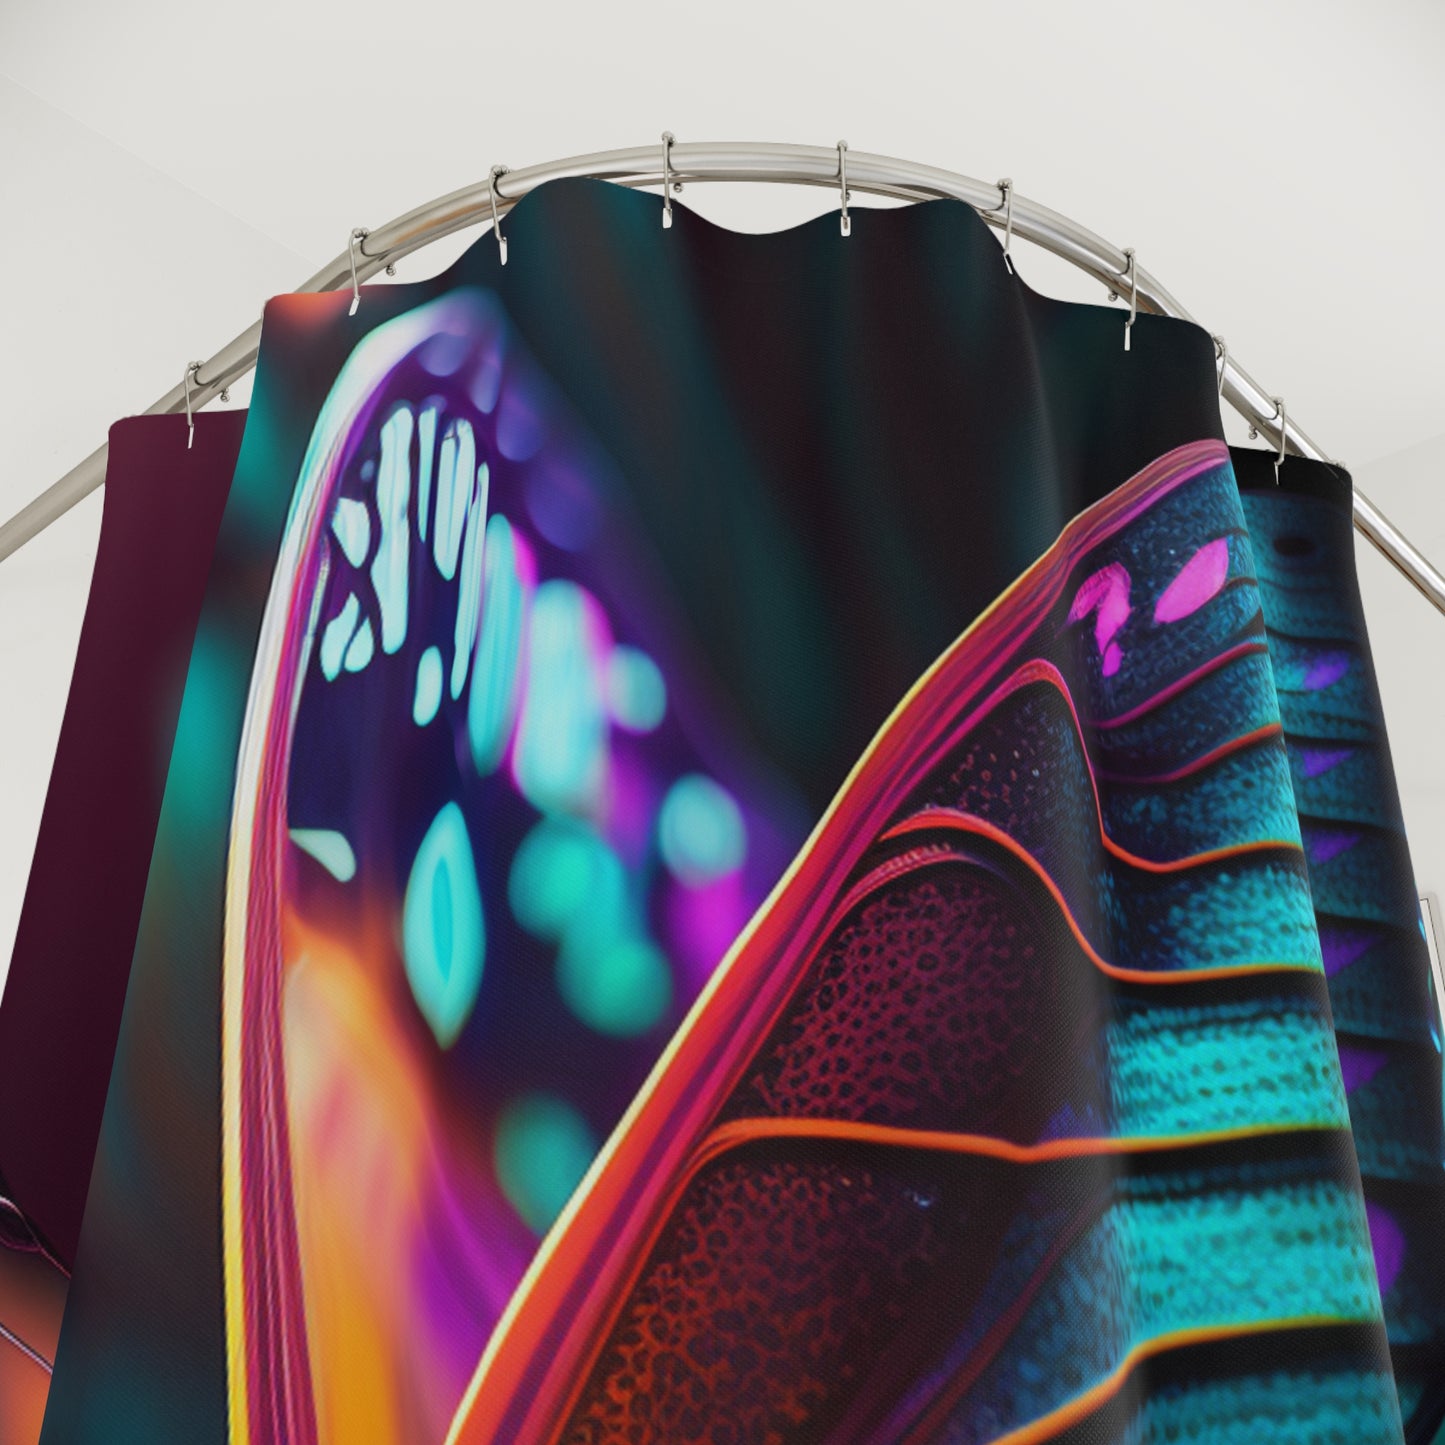 Polyester Shower Curtain neon butterfly macro 2